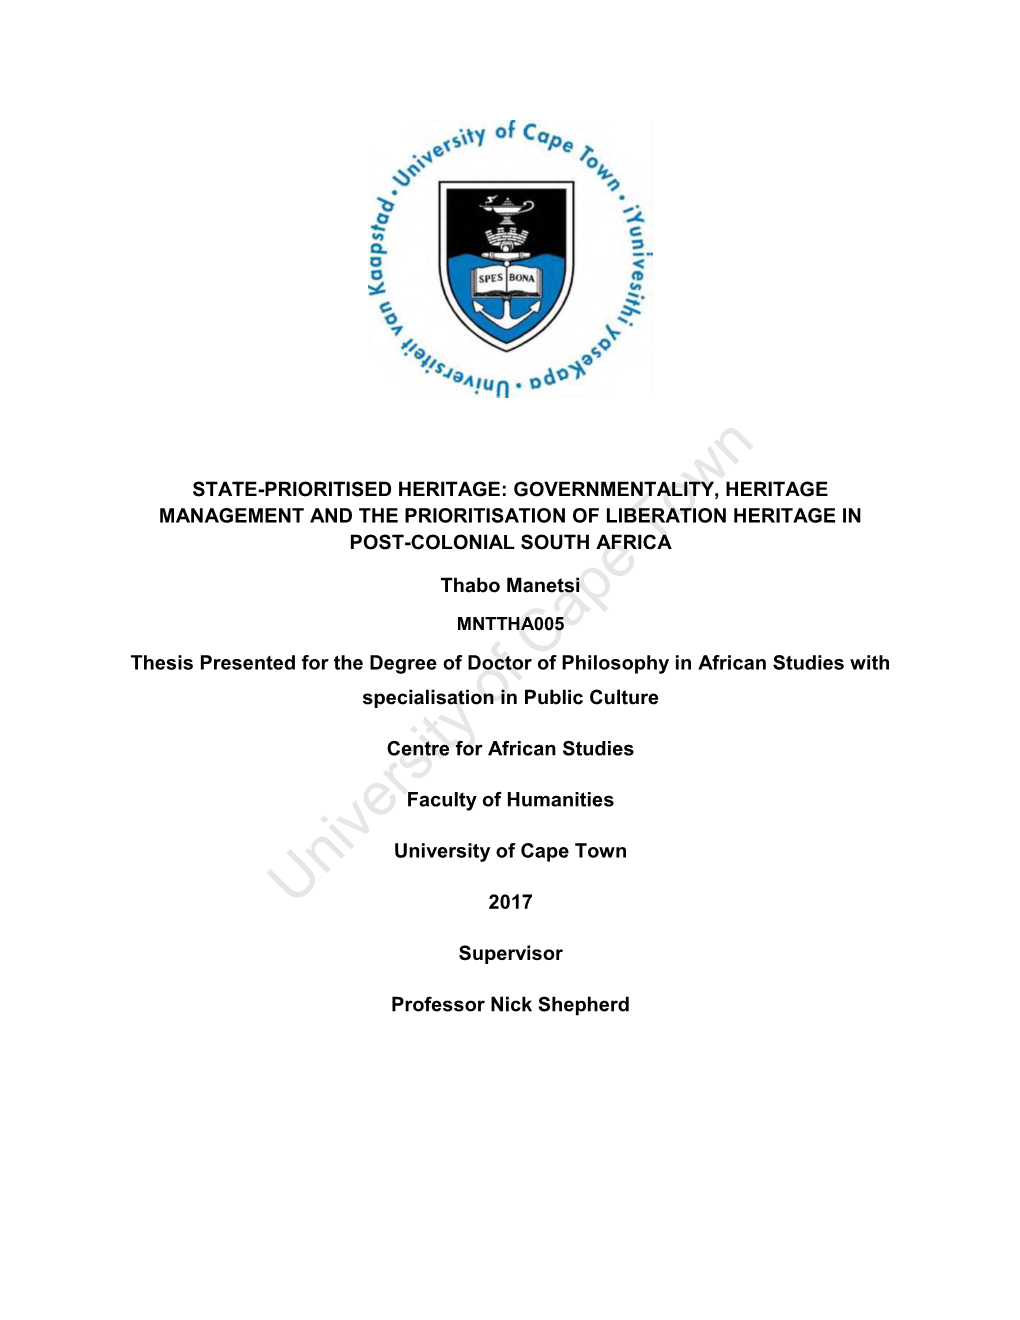 STATE-PRIORITISED HERITAGE: GOVERNMENTALITY, HERITAGE MANAGEMENT and the PRIORITISATION of LIBERATION HERITAGE in POST-COLONIAL SOUTH Africatown Thabo Manetsi